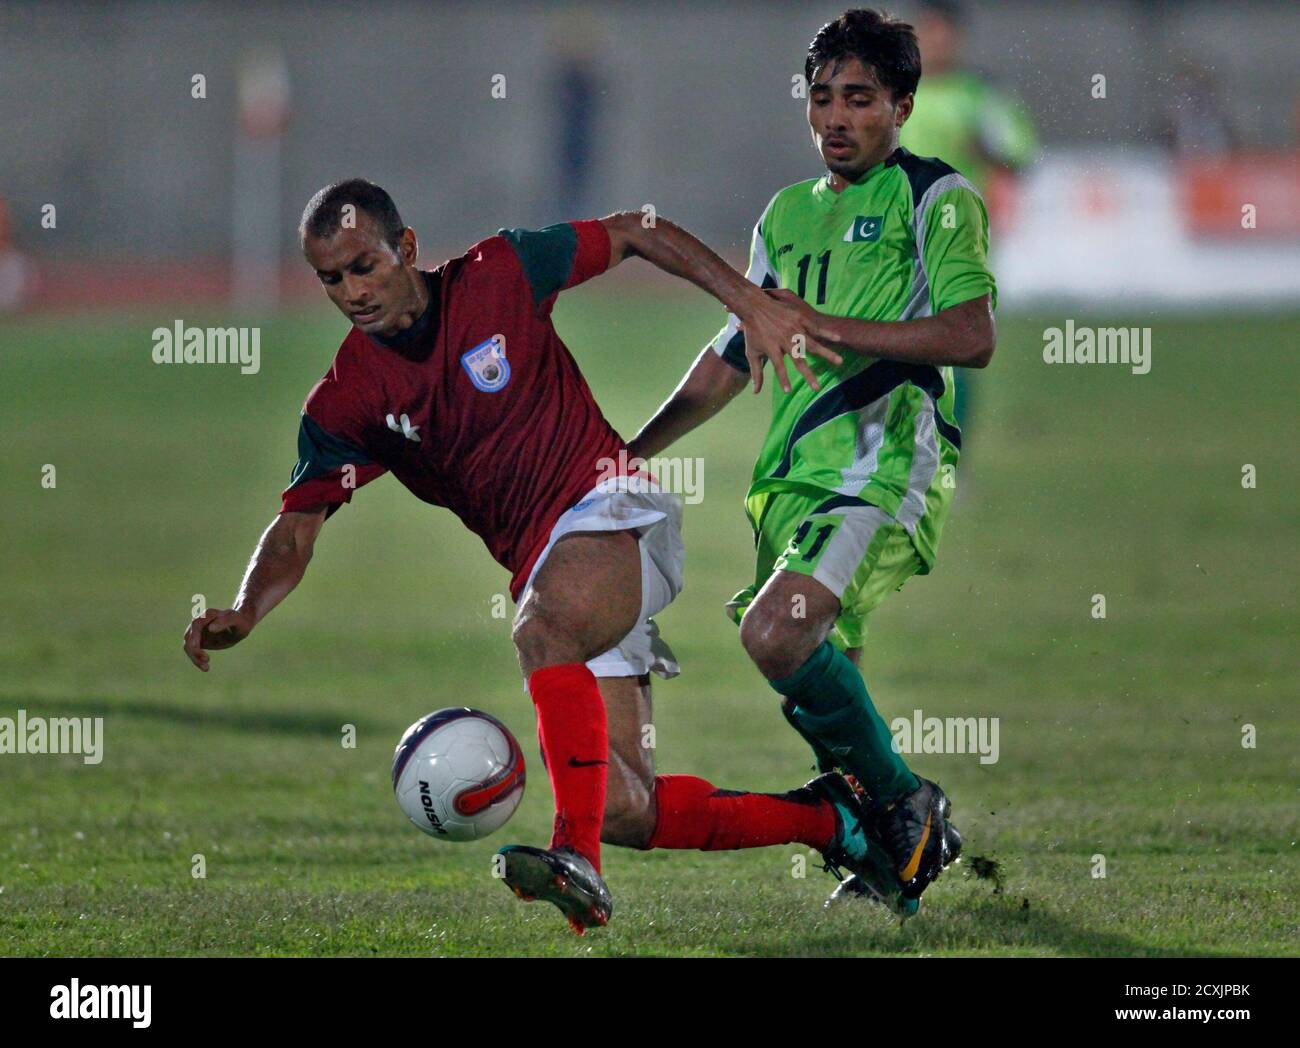 Bangladesh Rezaul (L) fights for the ball with Pakistan's Husnain Abbas during their 2014 World Cup qualifying soccer match at Punjab stadium in Lahore July 3, 2011. REUTERS/Mohsin Raza   (PAKISTAN - Tags: SPORT SOCCER) Stock Photo